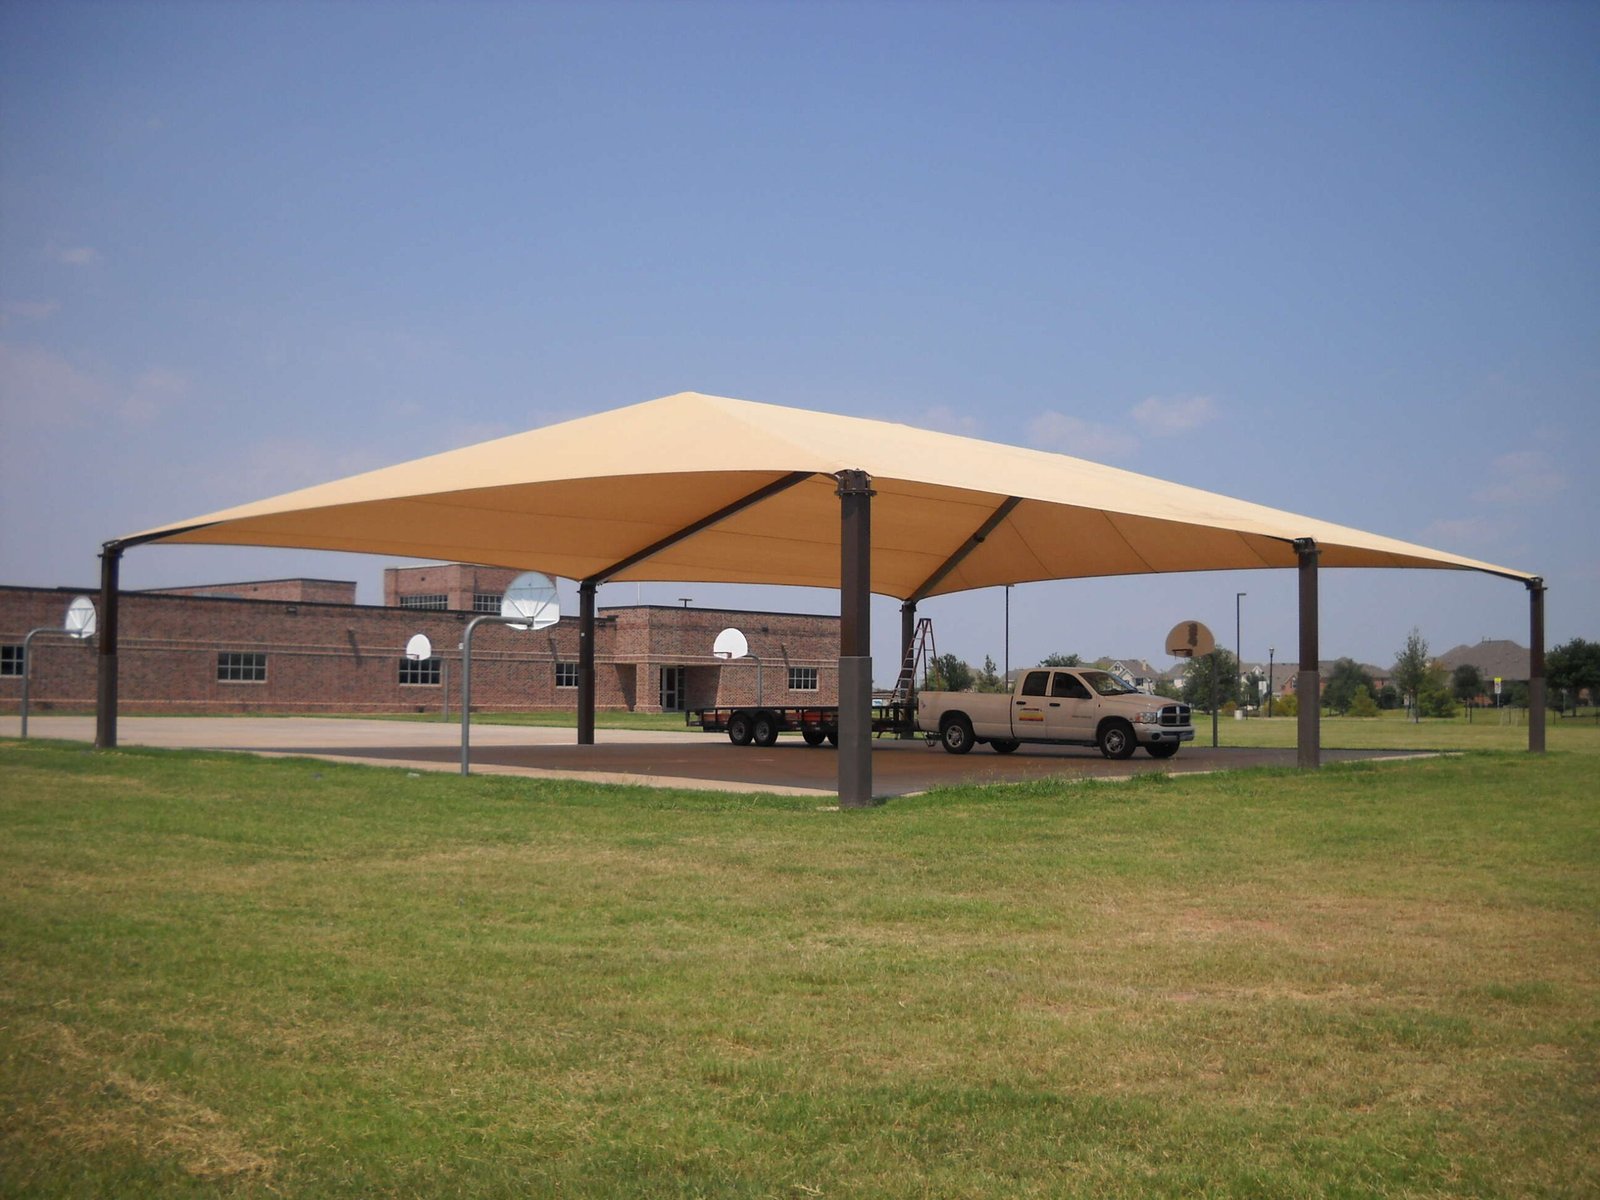 How to Choose an Ideal Shade Structure